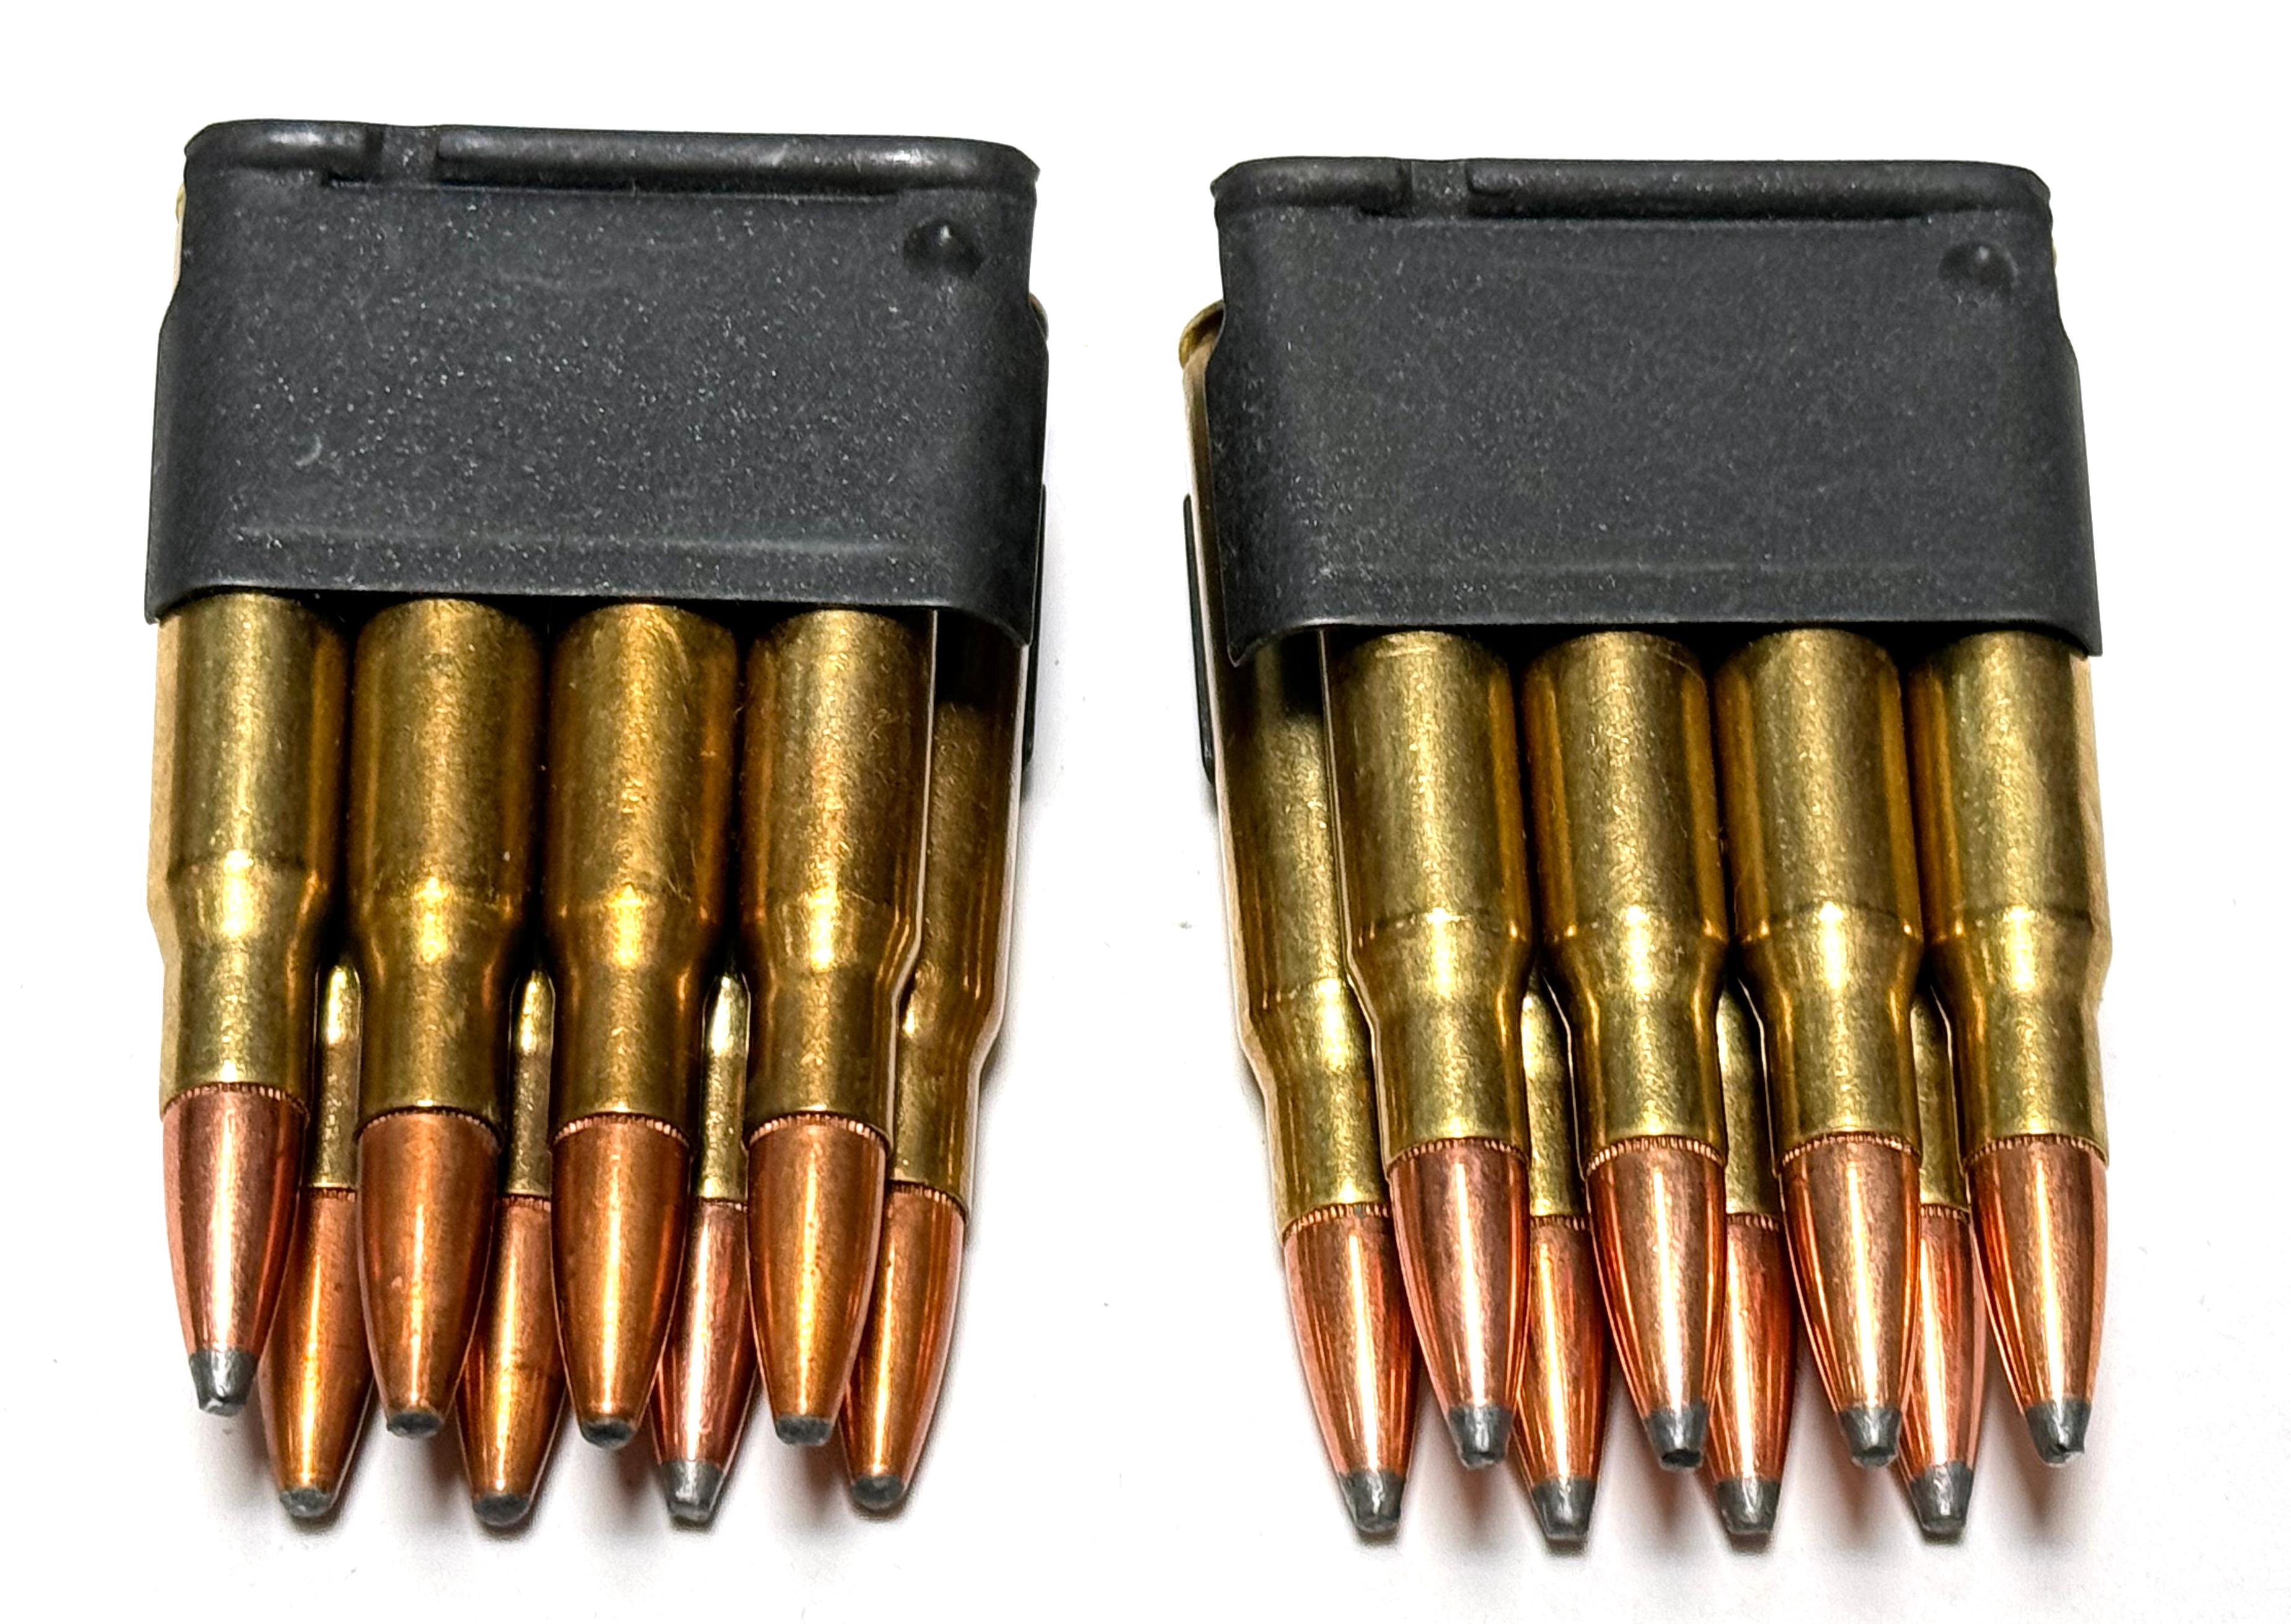 64rds. of Various Pointed SP Ammunition in Enblock Clips